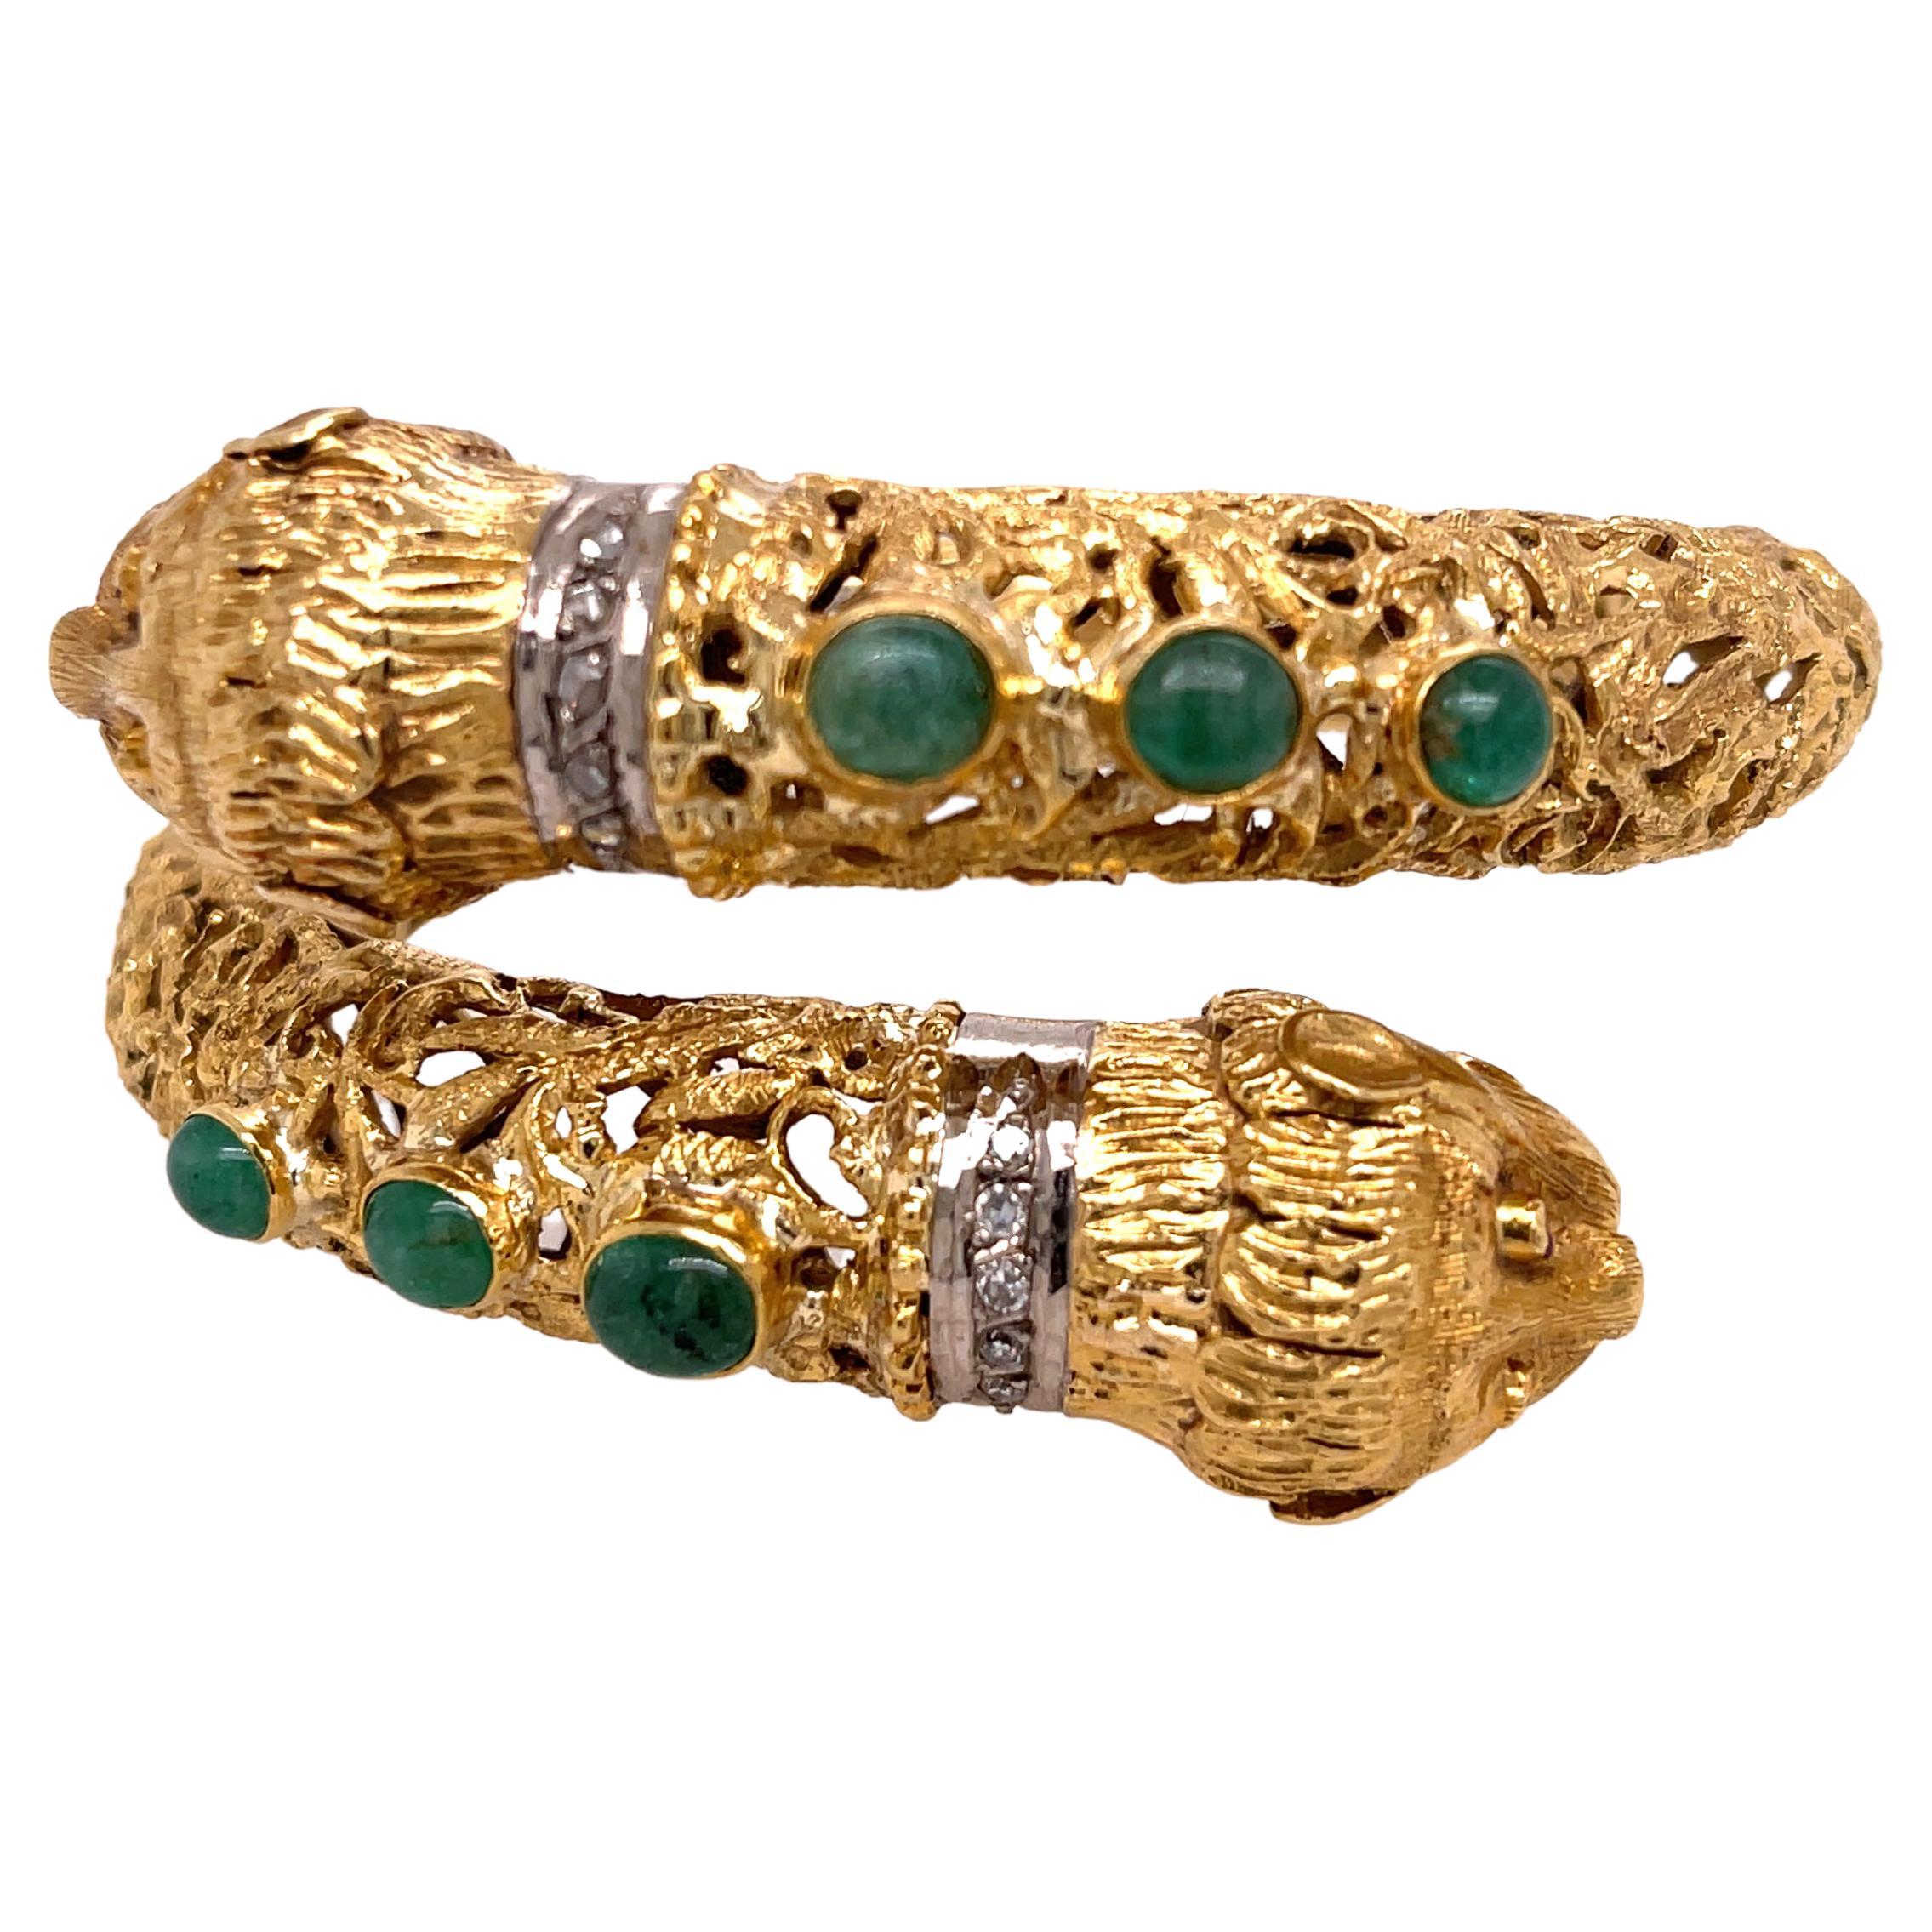 This stunning bracelet features 6 oval cut cabochon jade, diamonds and Bezel set rubies for eyes. The bracelet makes two lion heads at either end.